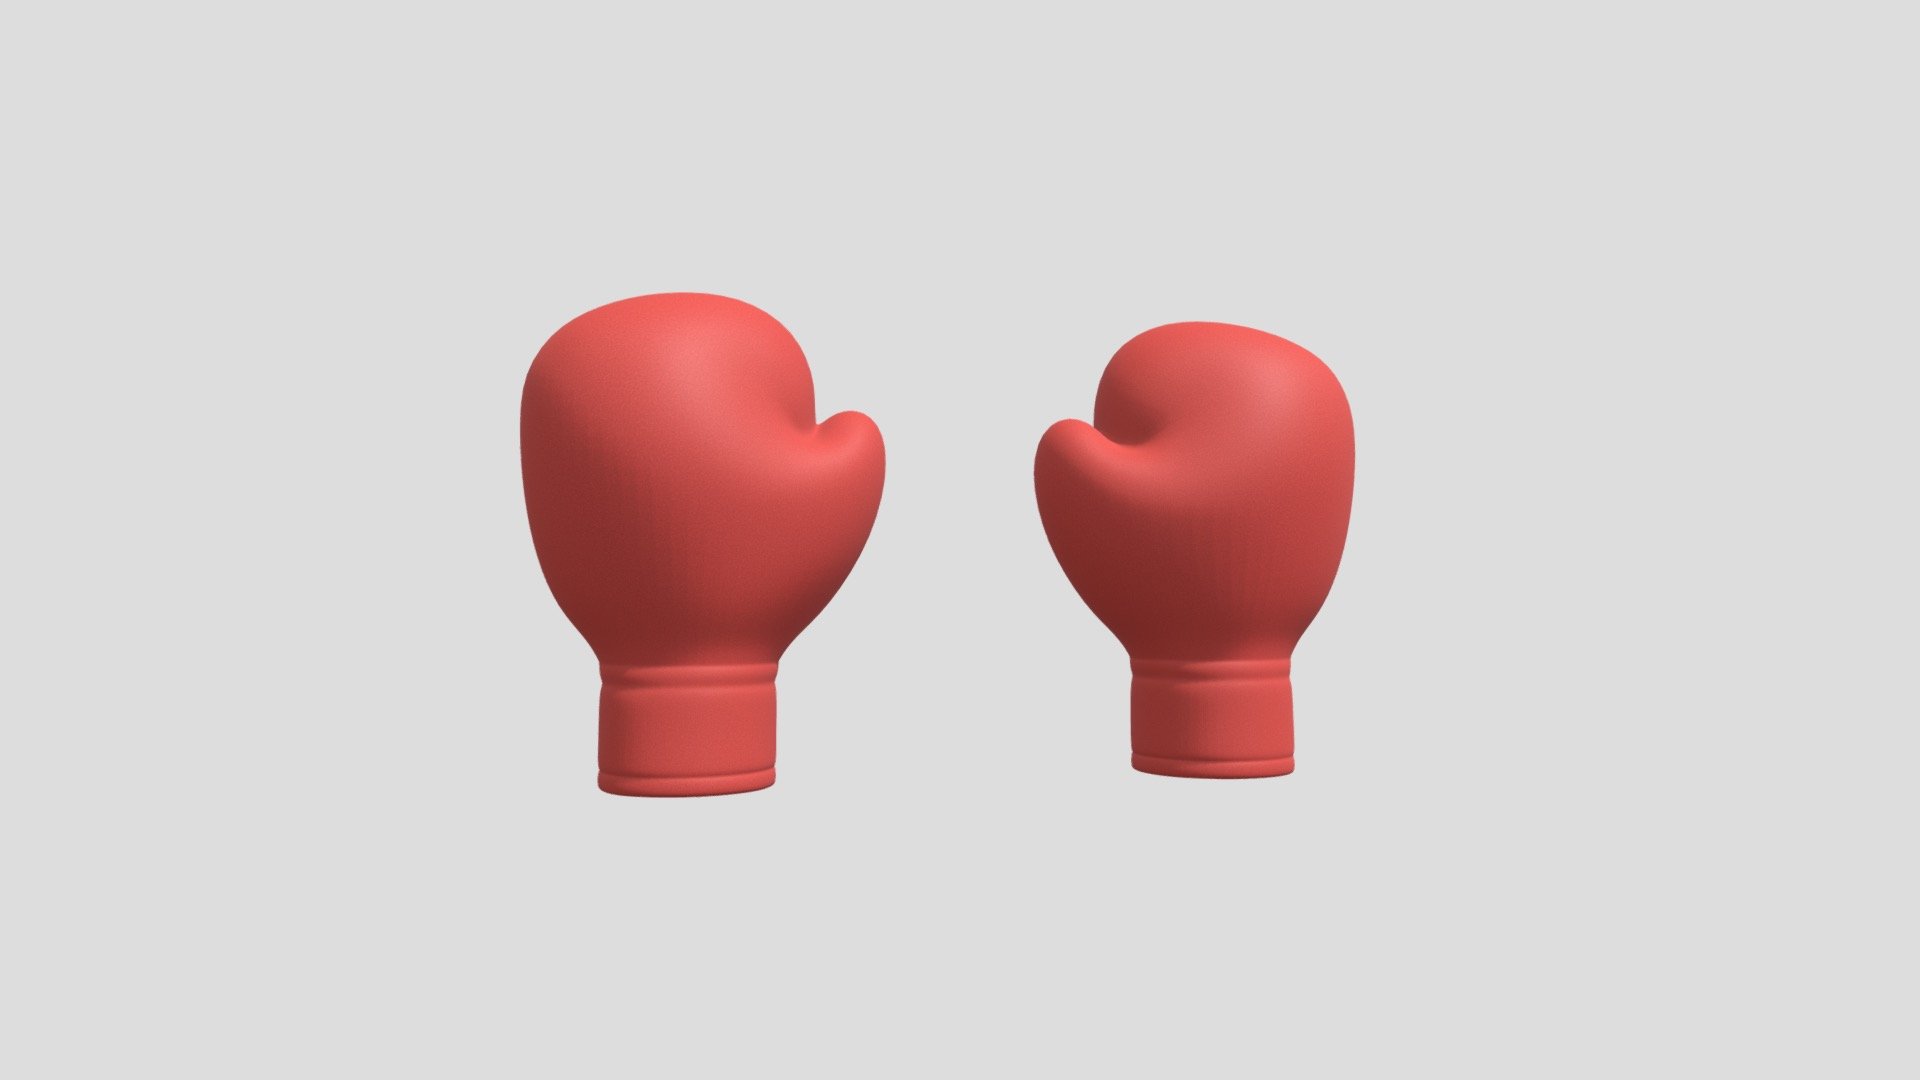 Textures: 1024 x 1024, Colors on texture: red

Has Normal Map: 1024 x 1024.

Materials: 1 - Boxing Gloves

Smooth shaded.

Mirrored.

Subdivision Level: 2

Rigged.

Origin located on middle-center.

Polygons: 36224

Vertices: 18116

Formats: Fbx, Obj, Stl, Dae.

I hope you enjoy the model! - Boxing Gloves - Buy Royalty Free 3D model by Ed+ (@EDplus) 3d model